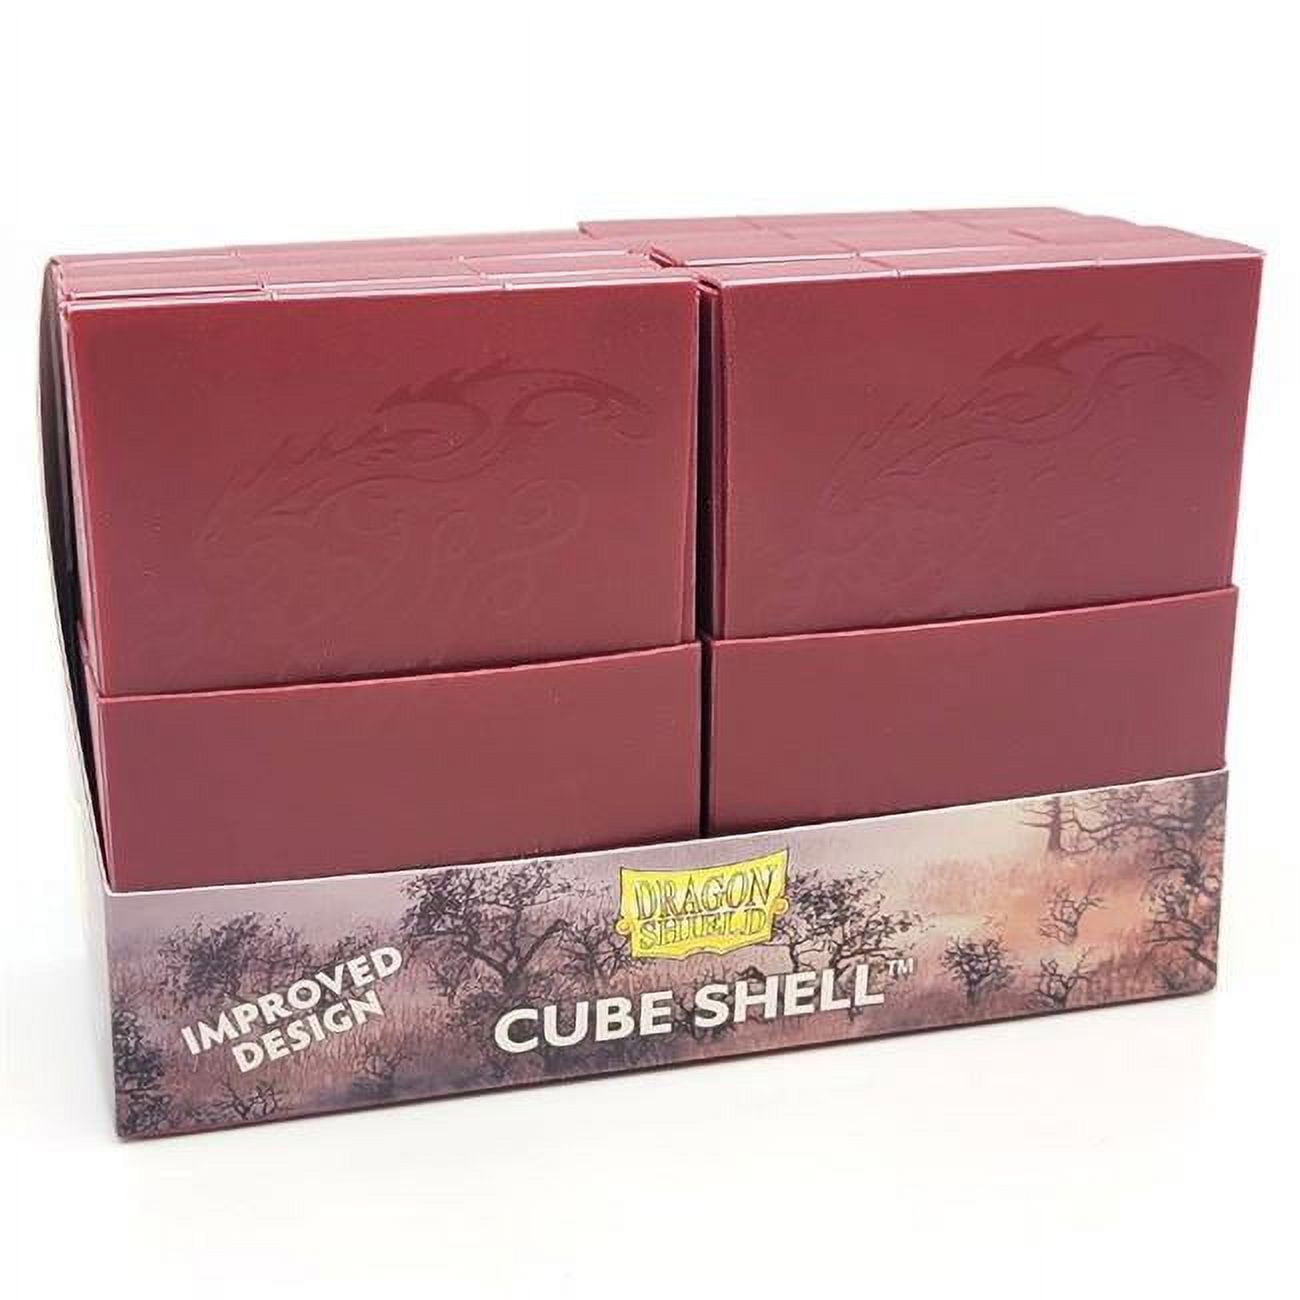 Picture of Arcane Tinmen ATM30550 Cube Shell Card Deck Box, Blood Red - 8 Piece